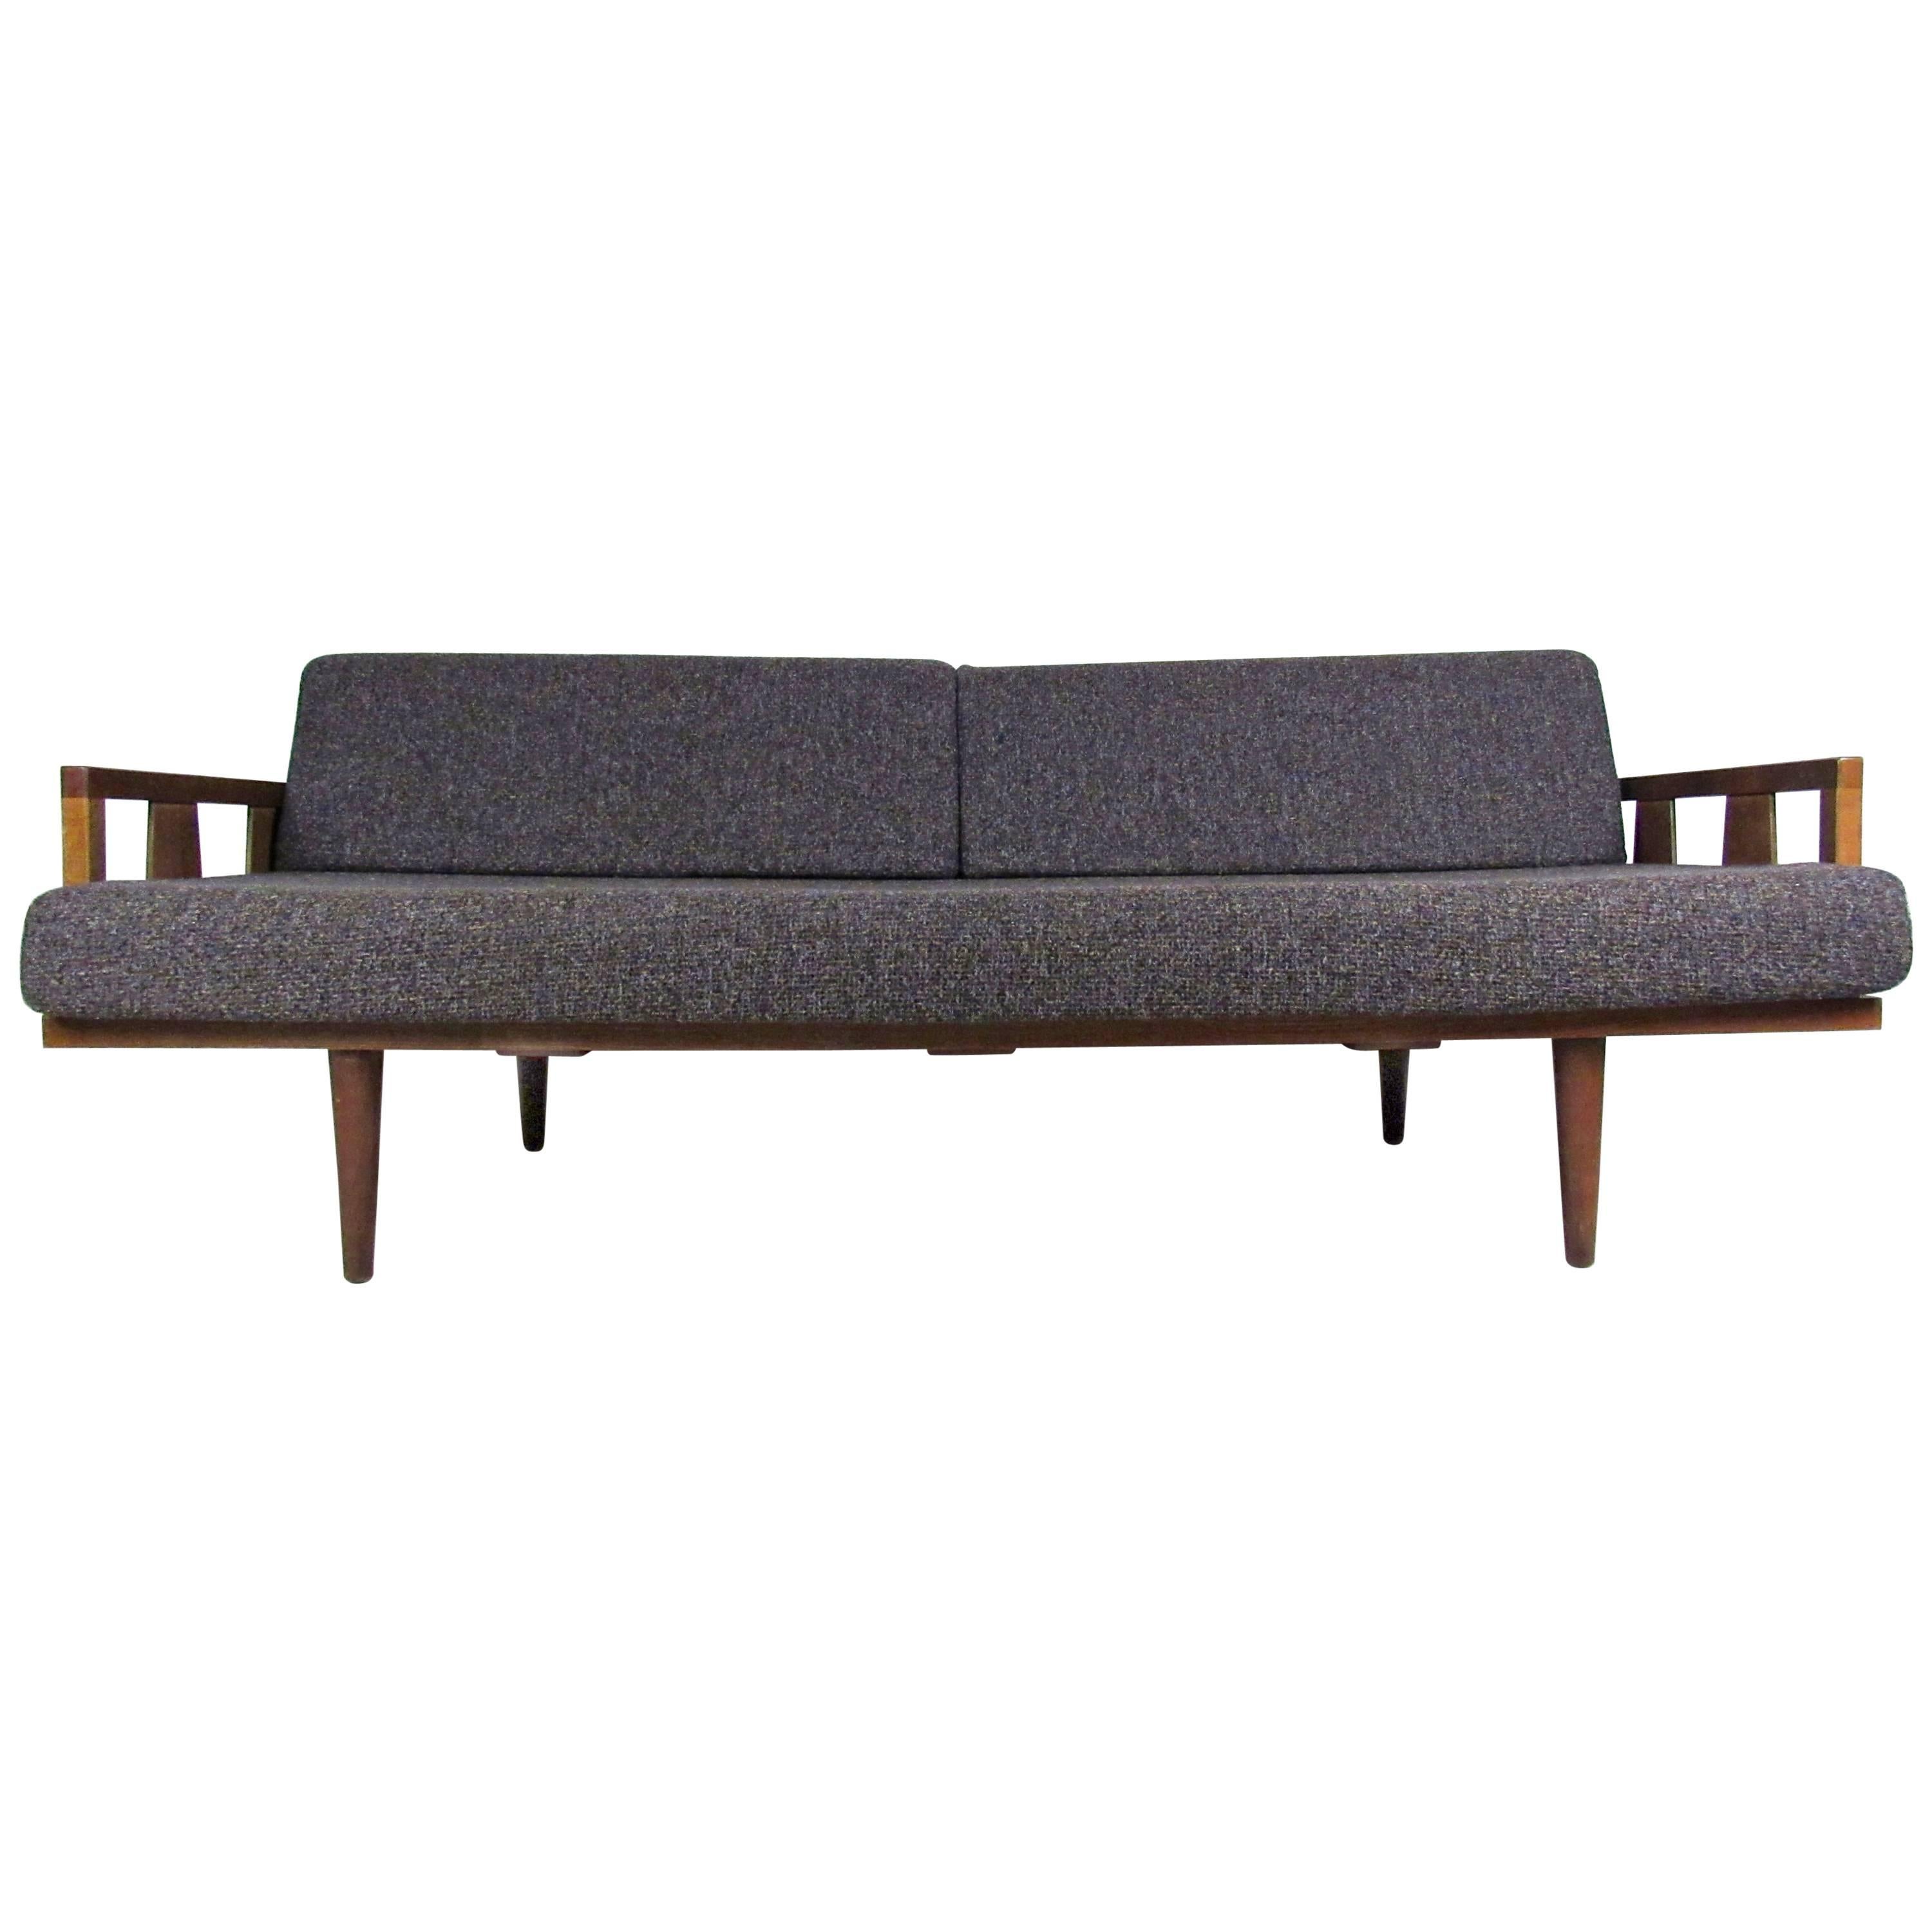 Unique Mid-Century Modern Daybed Sofa